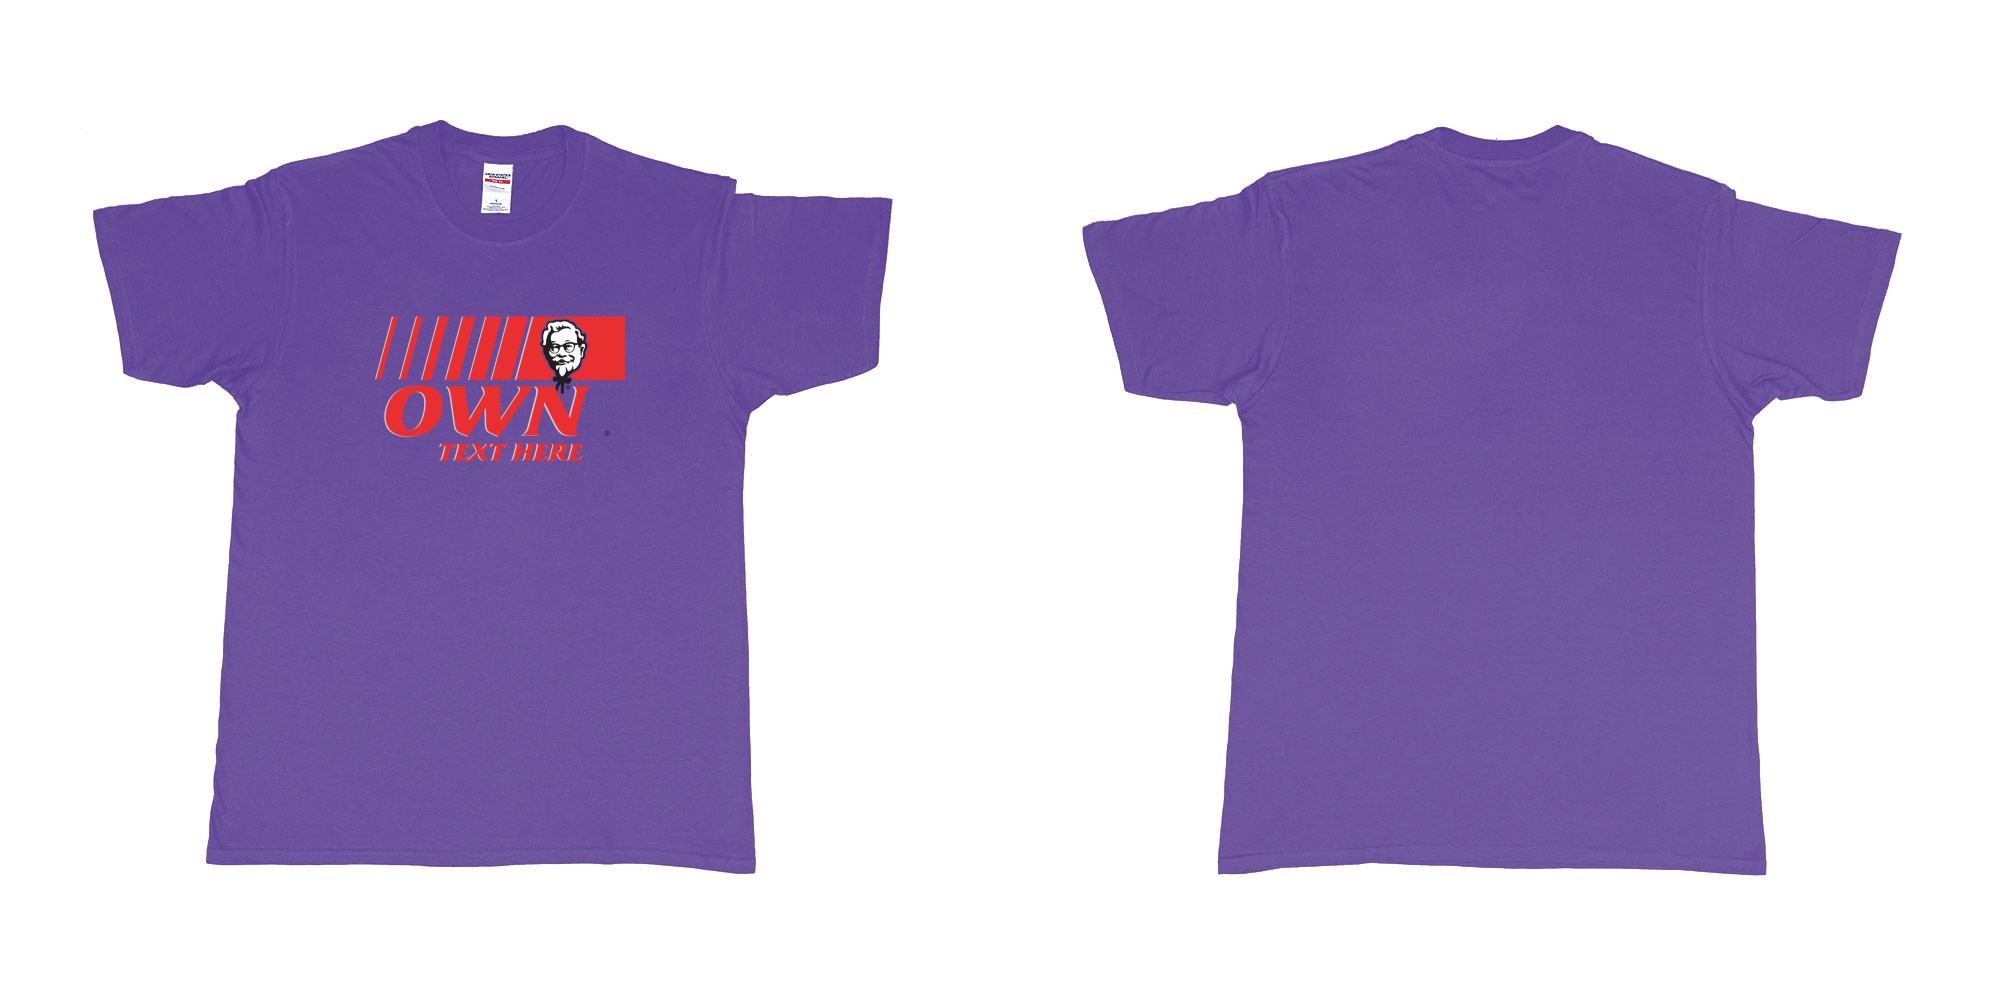 Custom tshirt design KFC in fabric color purple choice your own text made in Bali by The Pirate Way